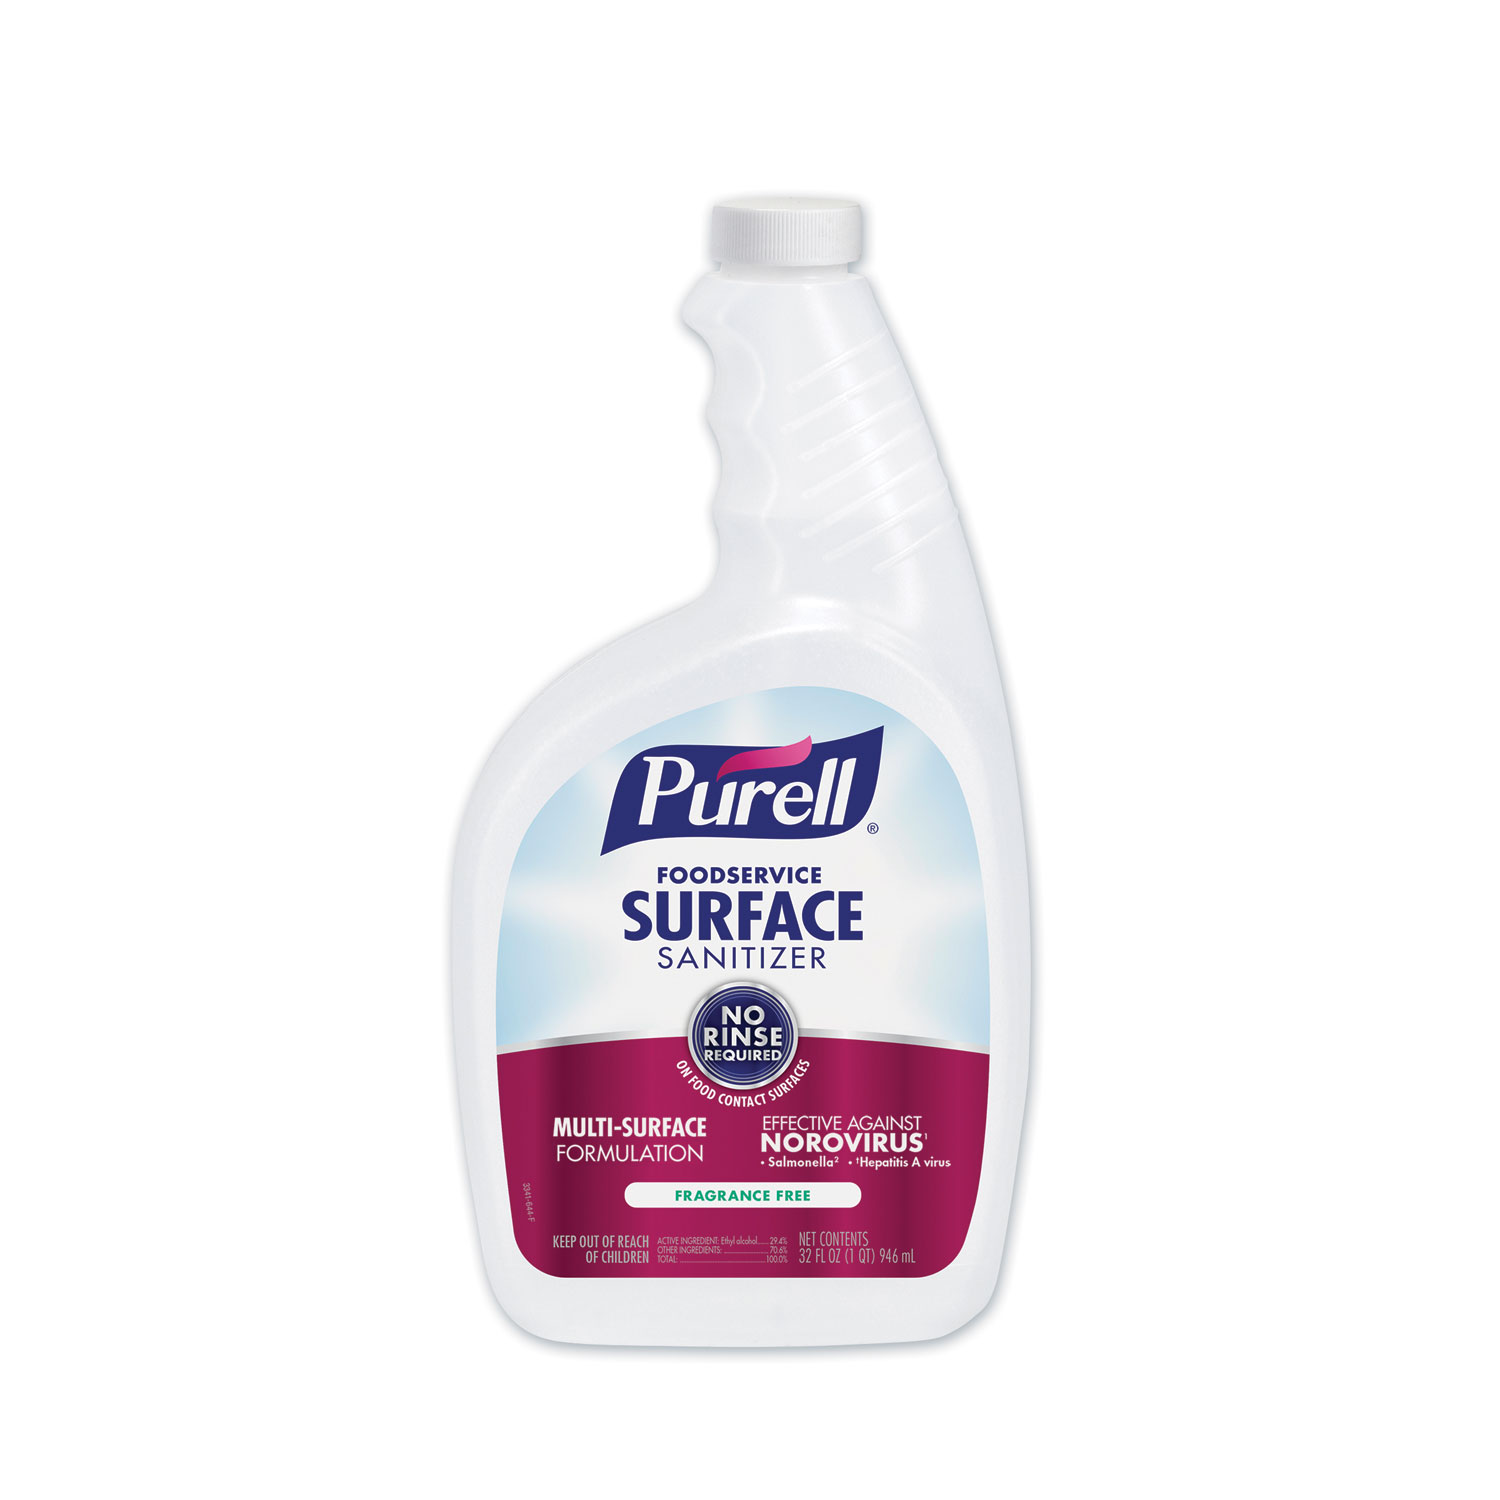 PURELL® Foodservice Surface Sanitizer, Fragrance Free, Capped Bottle with Spray Trigger, 6 Bottles and 2 Spray Triggers/Carton